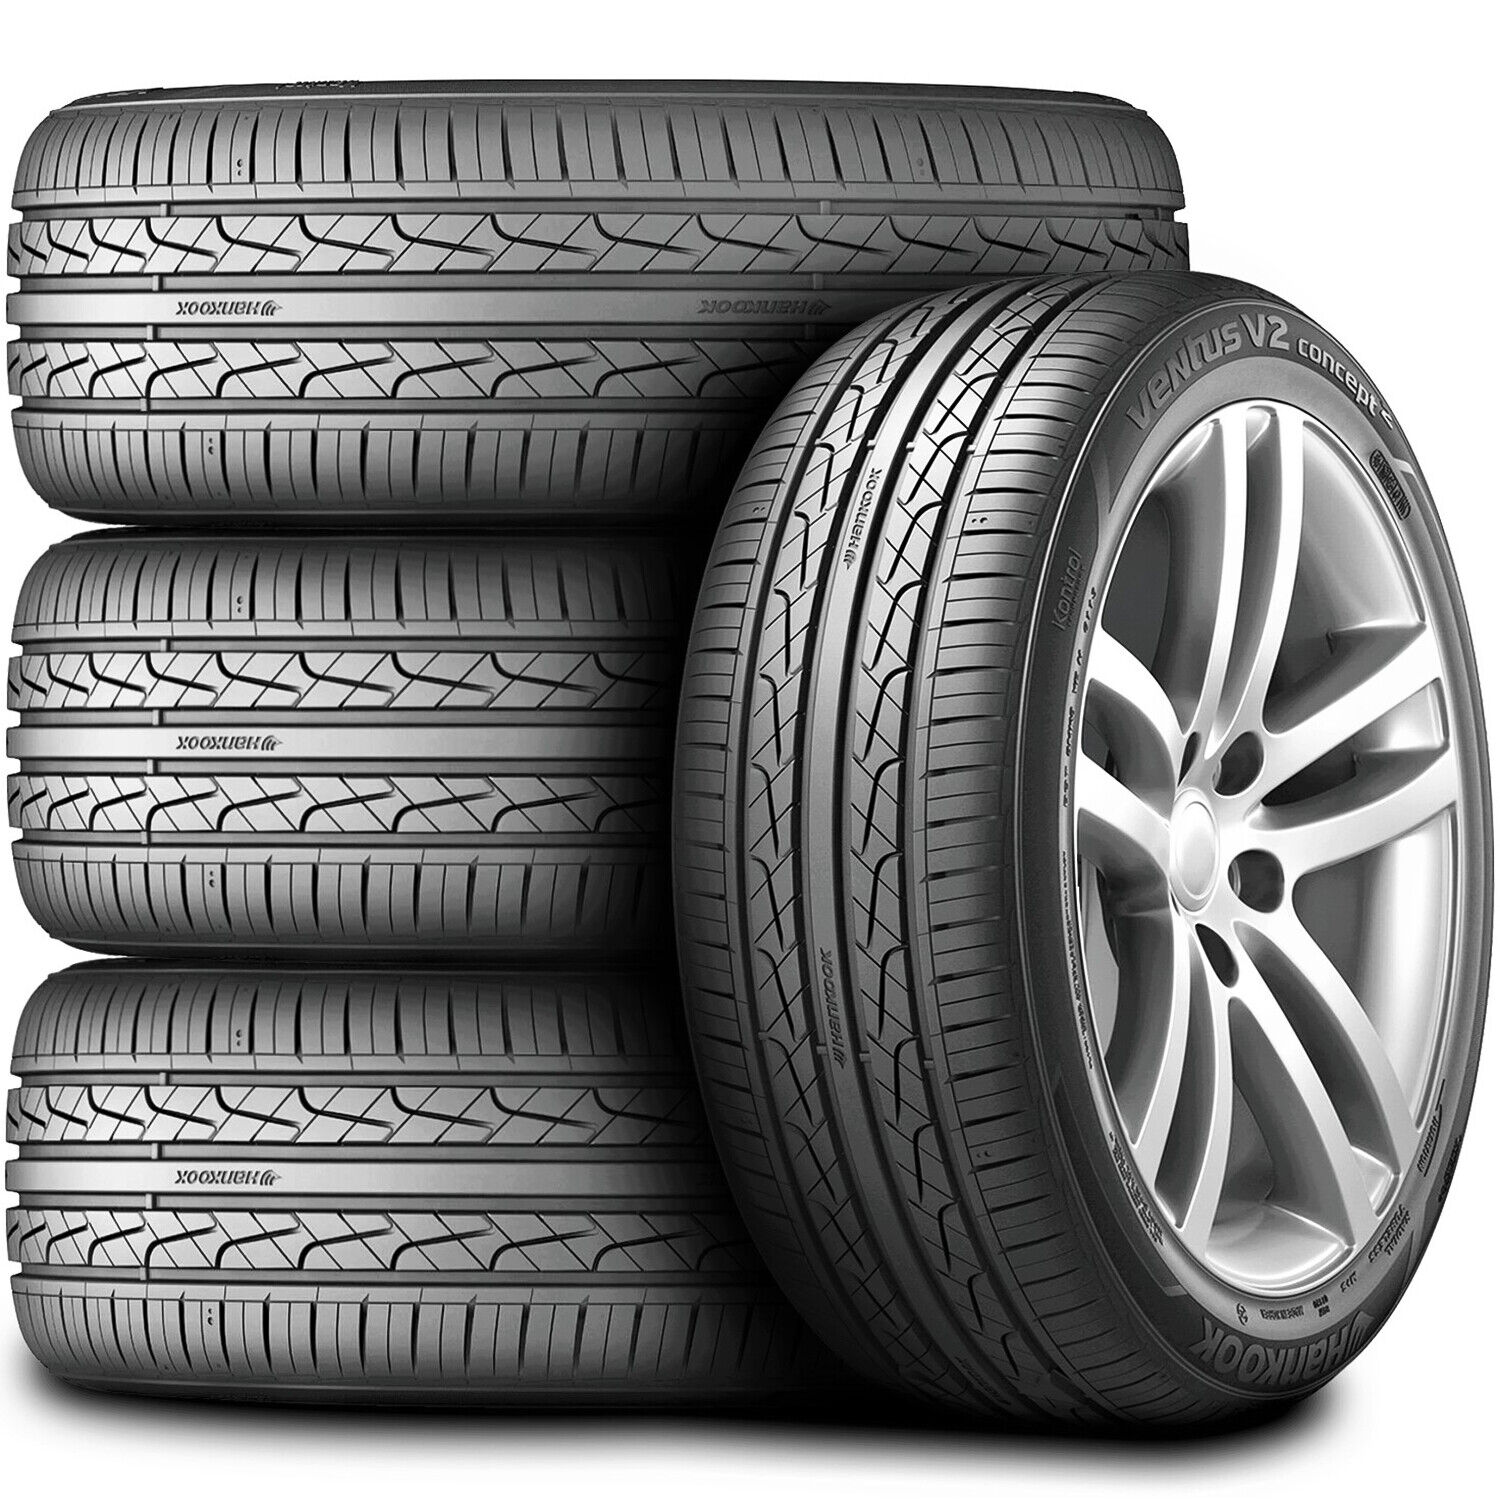 4 Tires Hankook Ventus V2 Concept2 205/50R15 86H AS Performance A/S